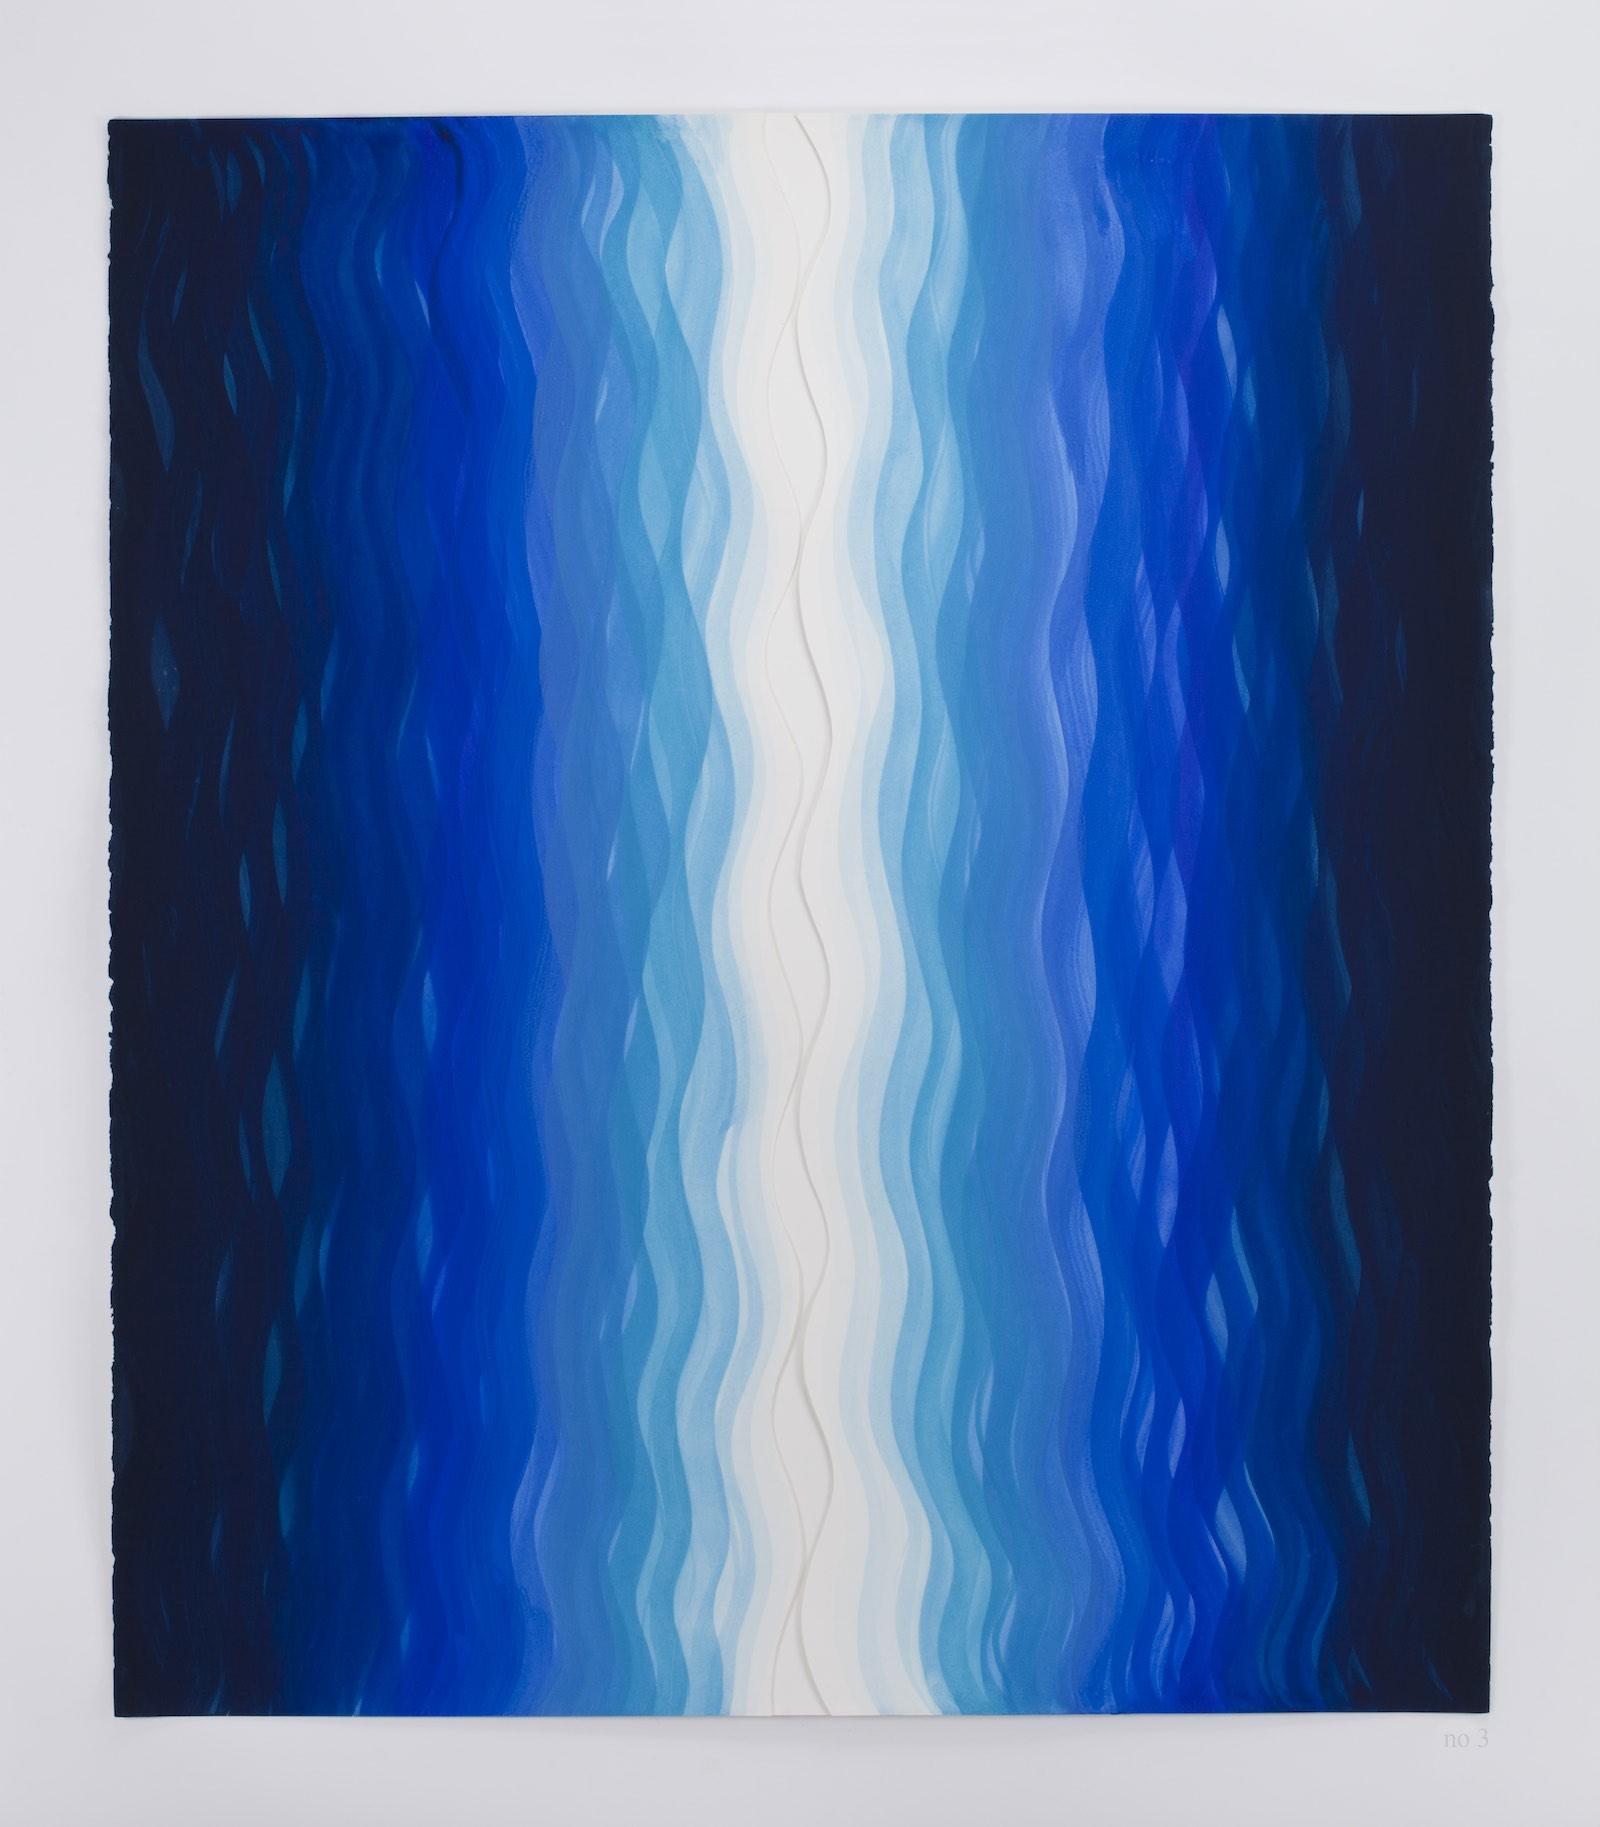 Karin Davie, Liquid Life with Spine no 3 (Extra Large), 2012. Part of the Liquid Life series. Gouache on shaped cut paper. 48 x 41 in.